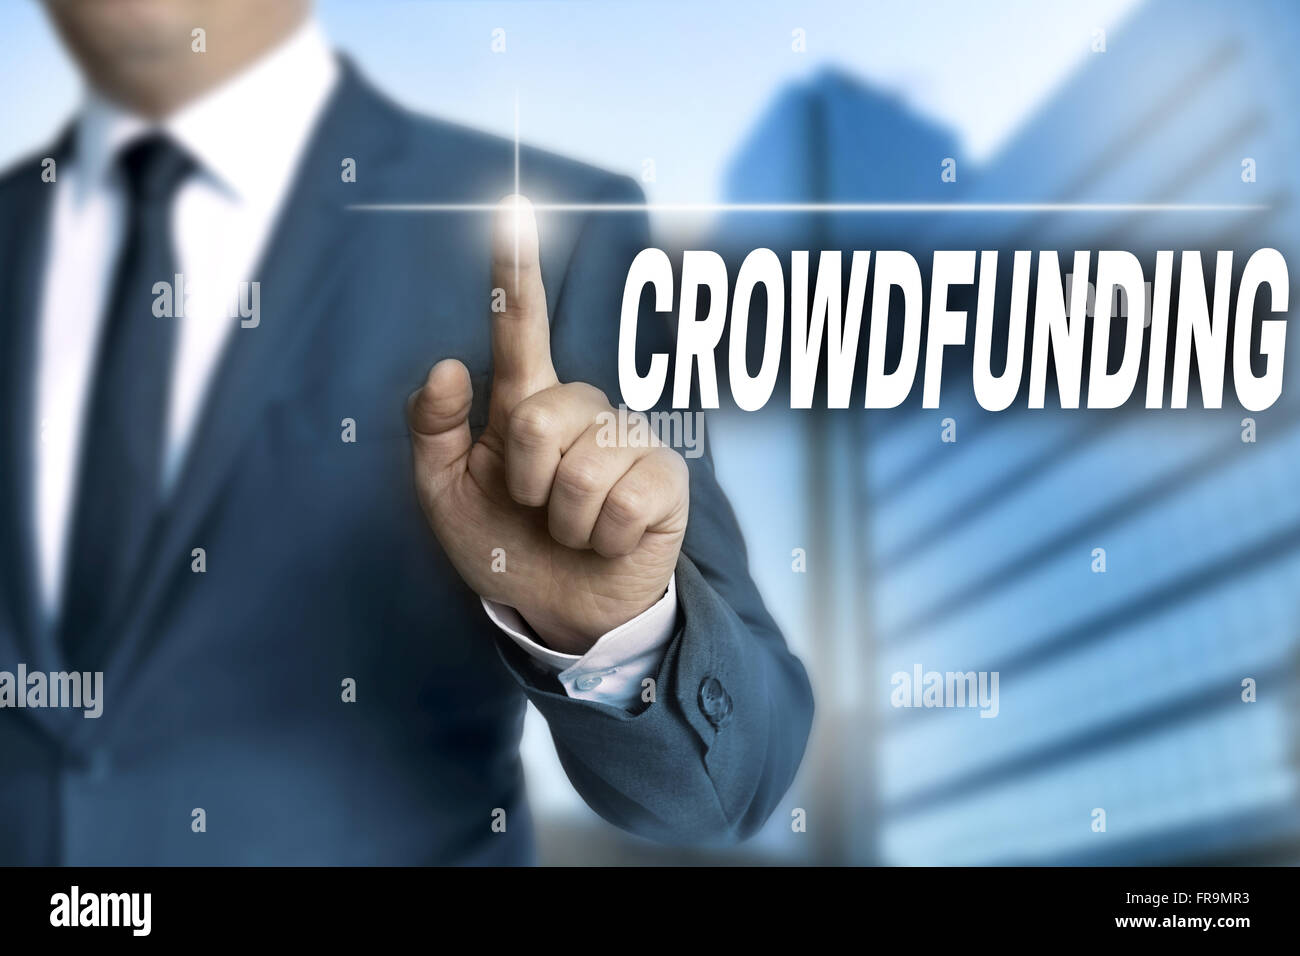 crowdfunding touchscreen is operated by businessman background. Stock Photo